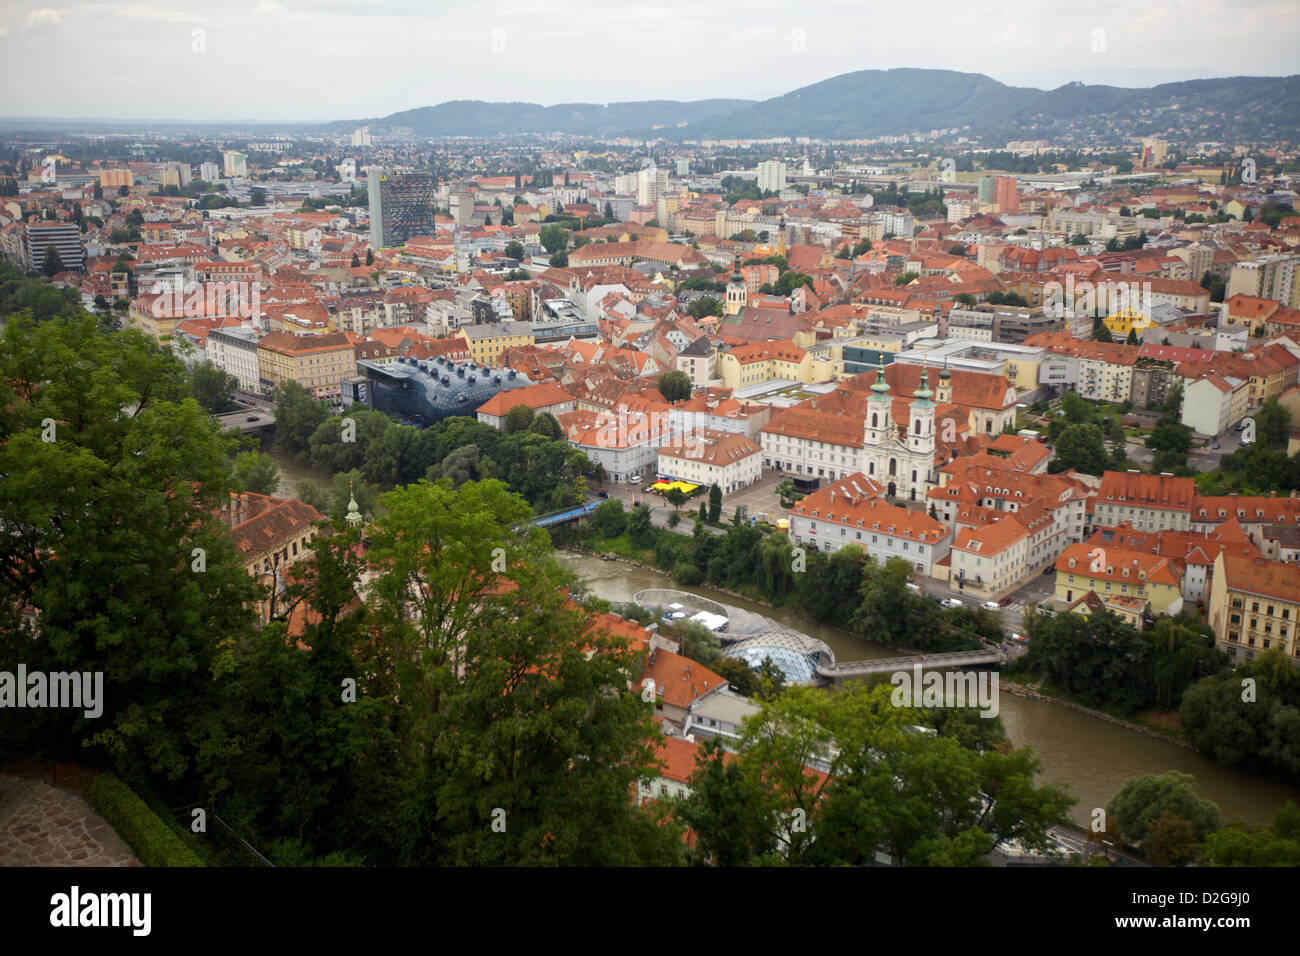 The city of Graz, Austria spreads out below a cover of clouds Stock Photo